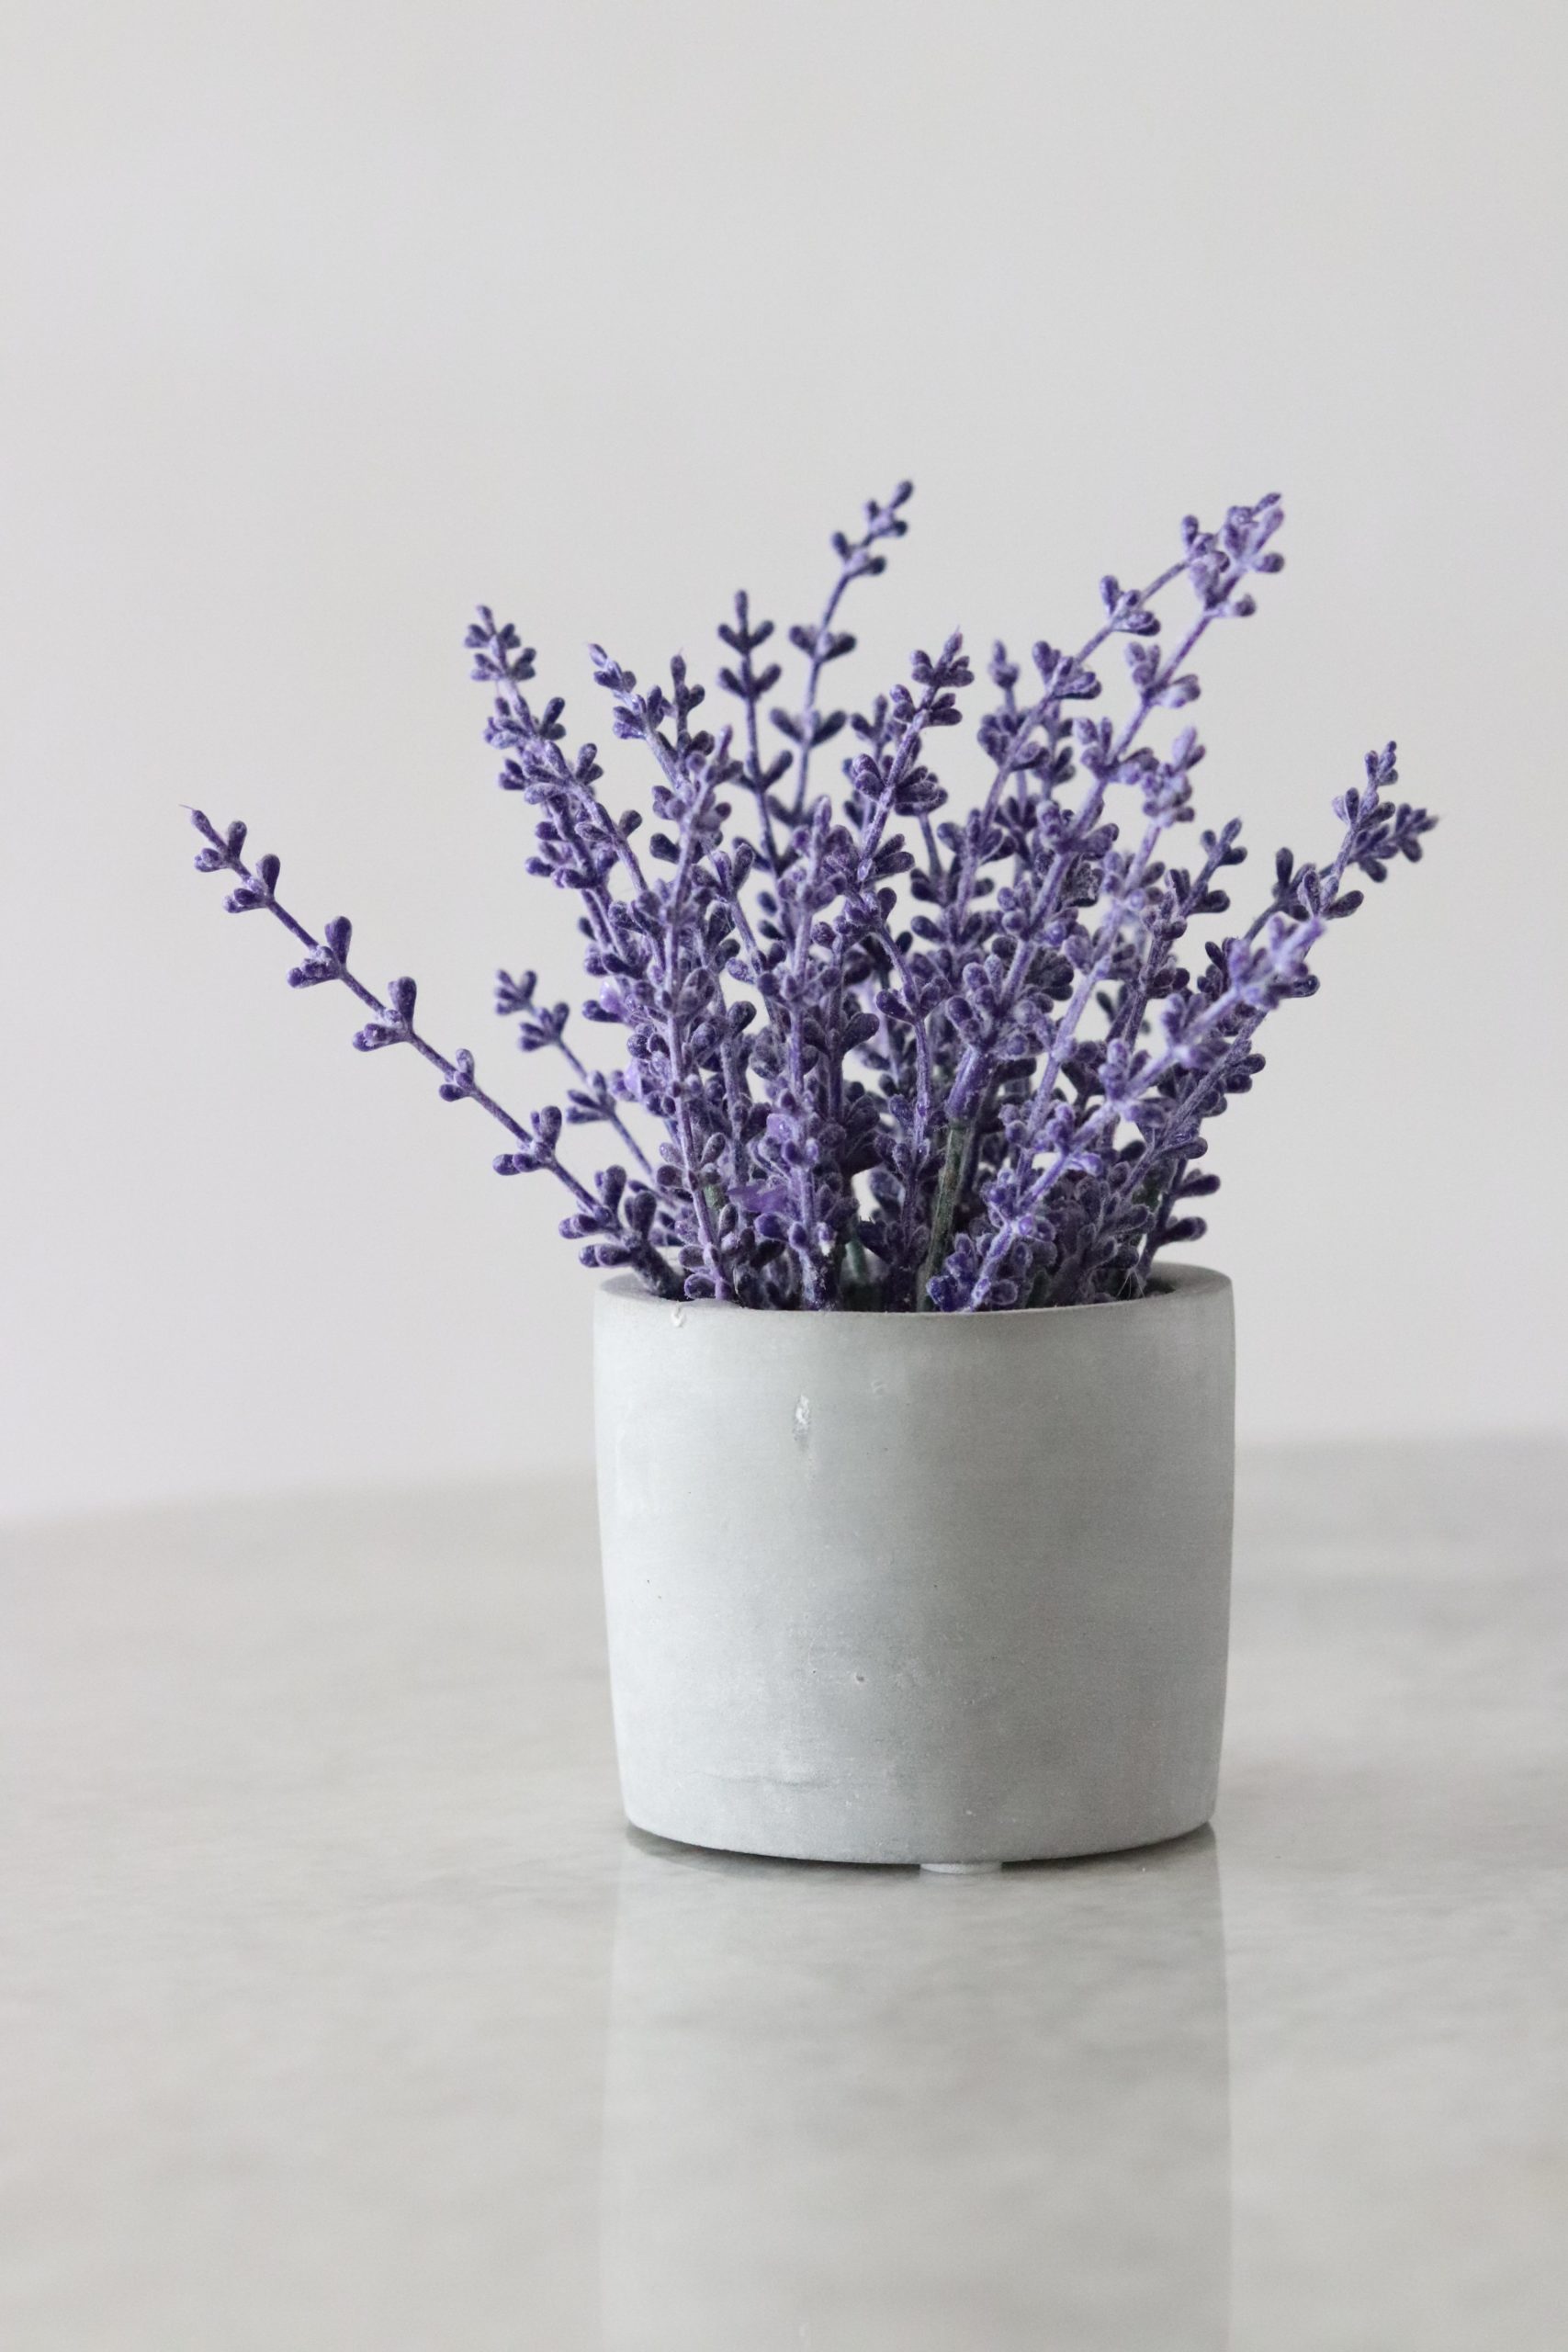 Lavender: create your own essential oil